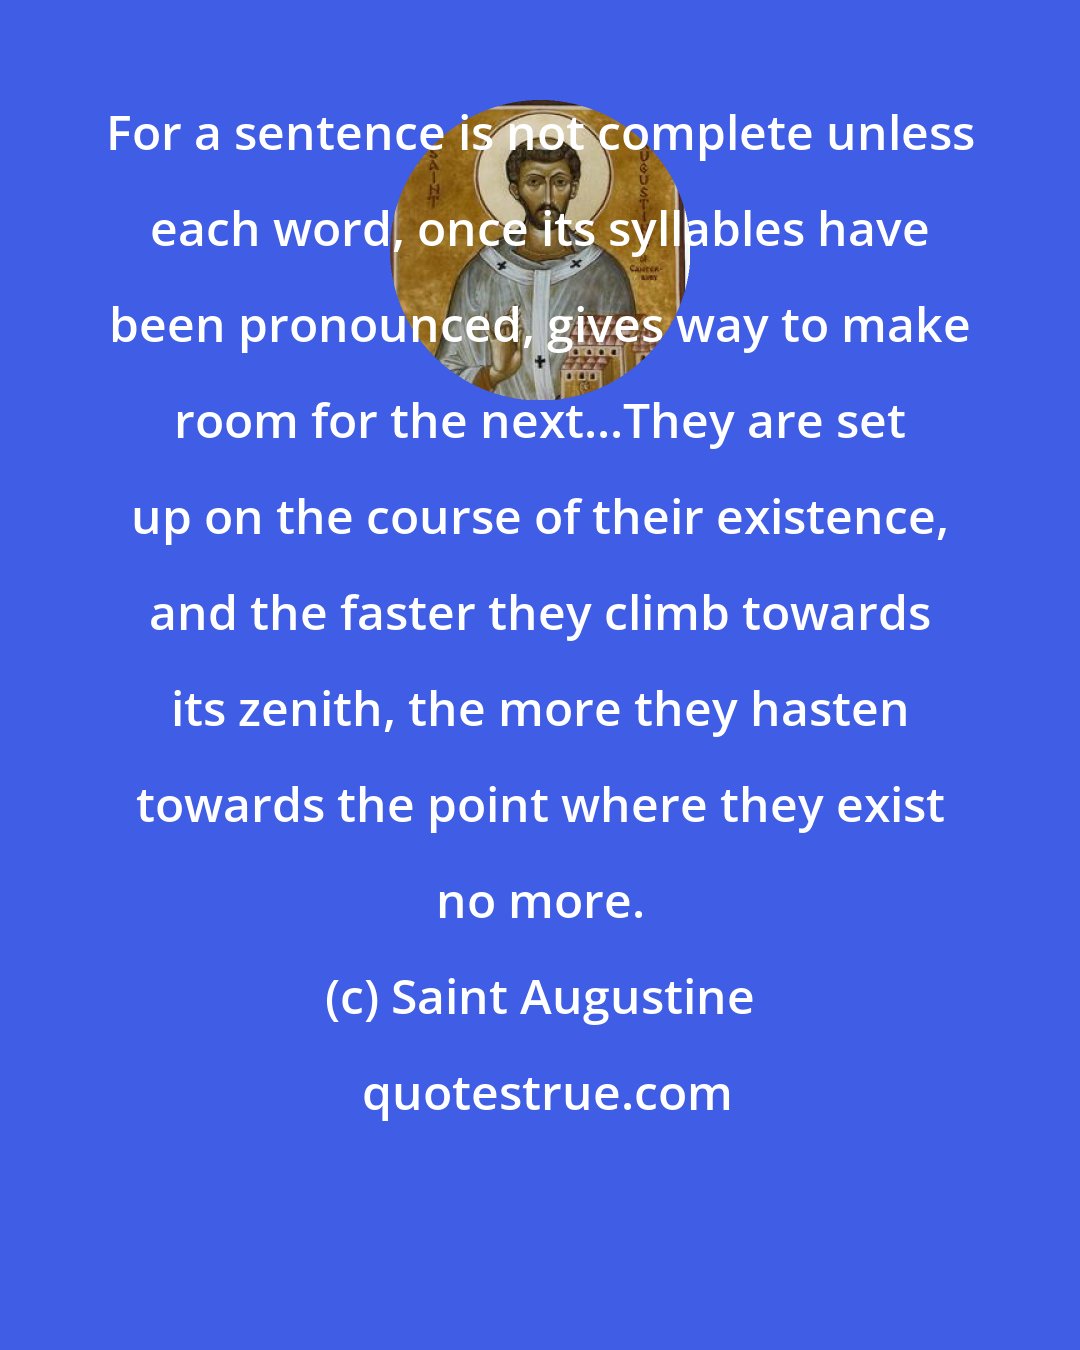 Saint Augustine: For a sentence is not complete unless each word, once its syllables have been pronounced, gives way to make room for the next...They are set up on the course of their existence, and the faster they climb towards its zenith, the more they hasten towards the point where they exist no more.